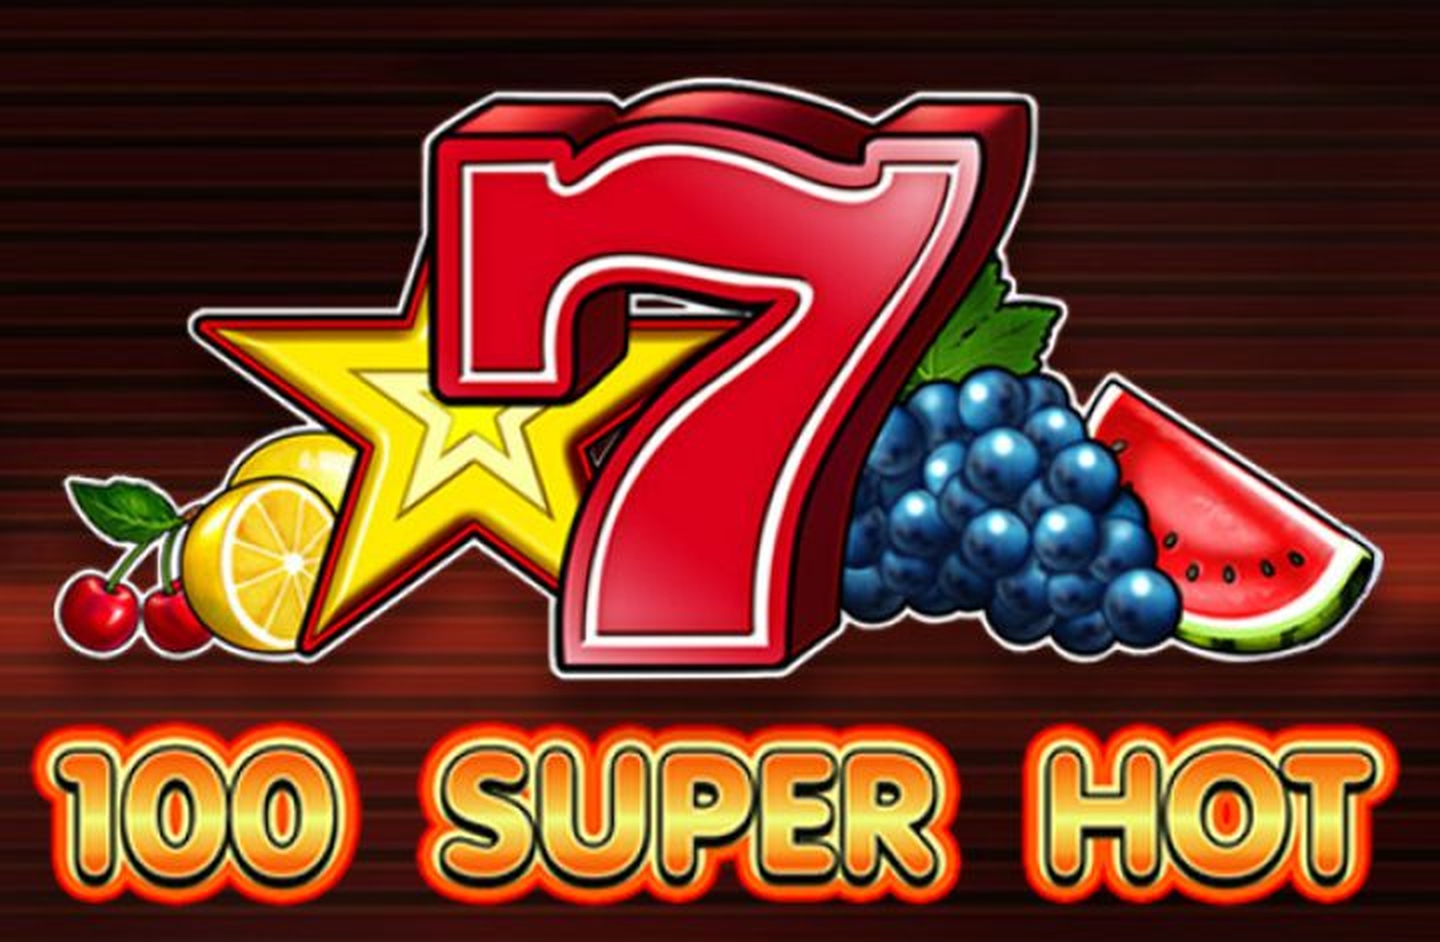 The 100 Super Hot Online Slot Demo Game by EGT